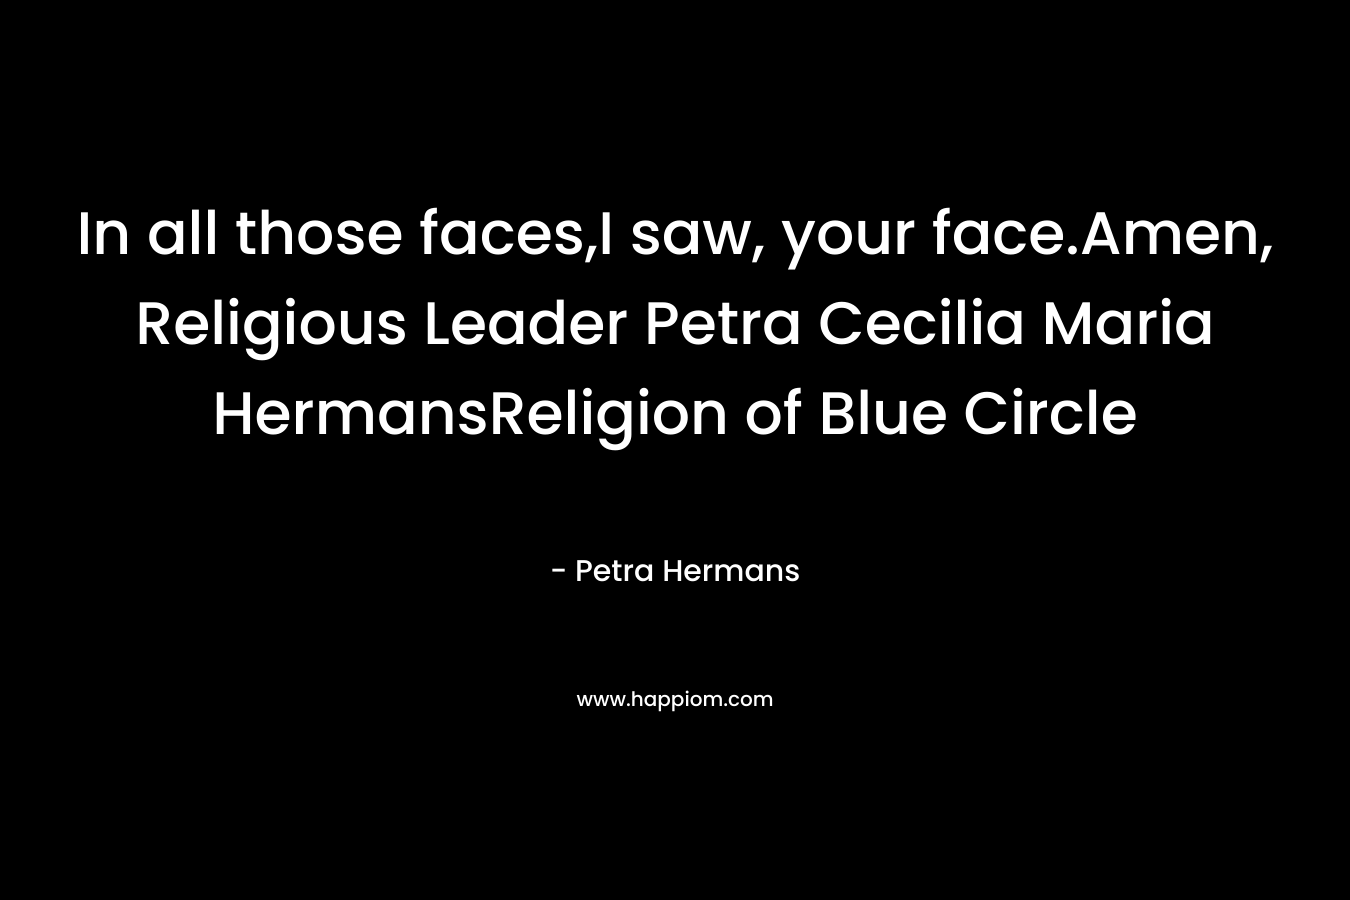 In all those faces,I saw, your face.Amen, Religious Leader Petra Cecilia Maria HermansReligion of Blue Circle – Petra Hermans